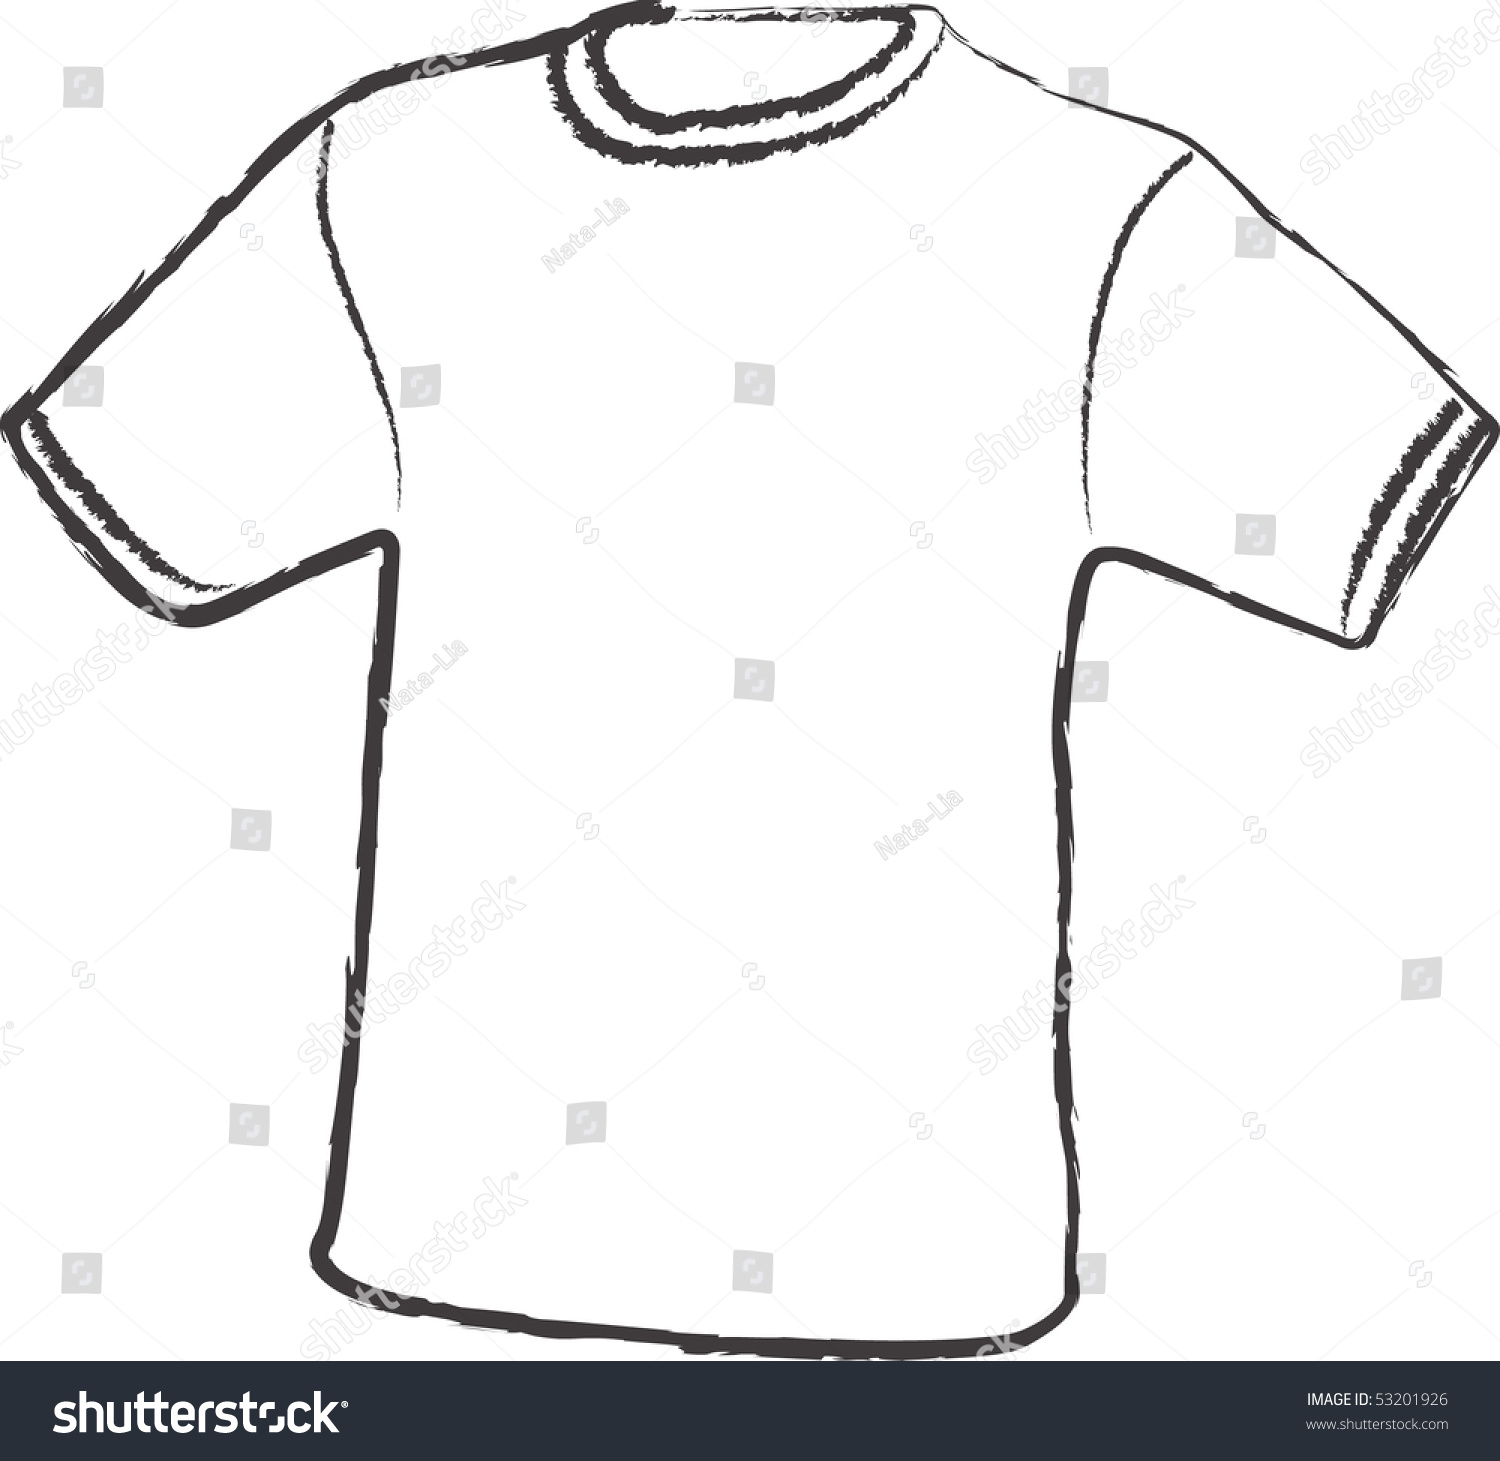 Blank Vector T Shirt Template For Your Design - 53201926 : Shutterstock